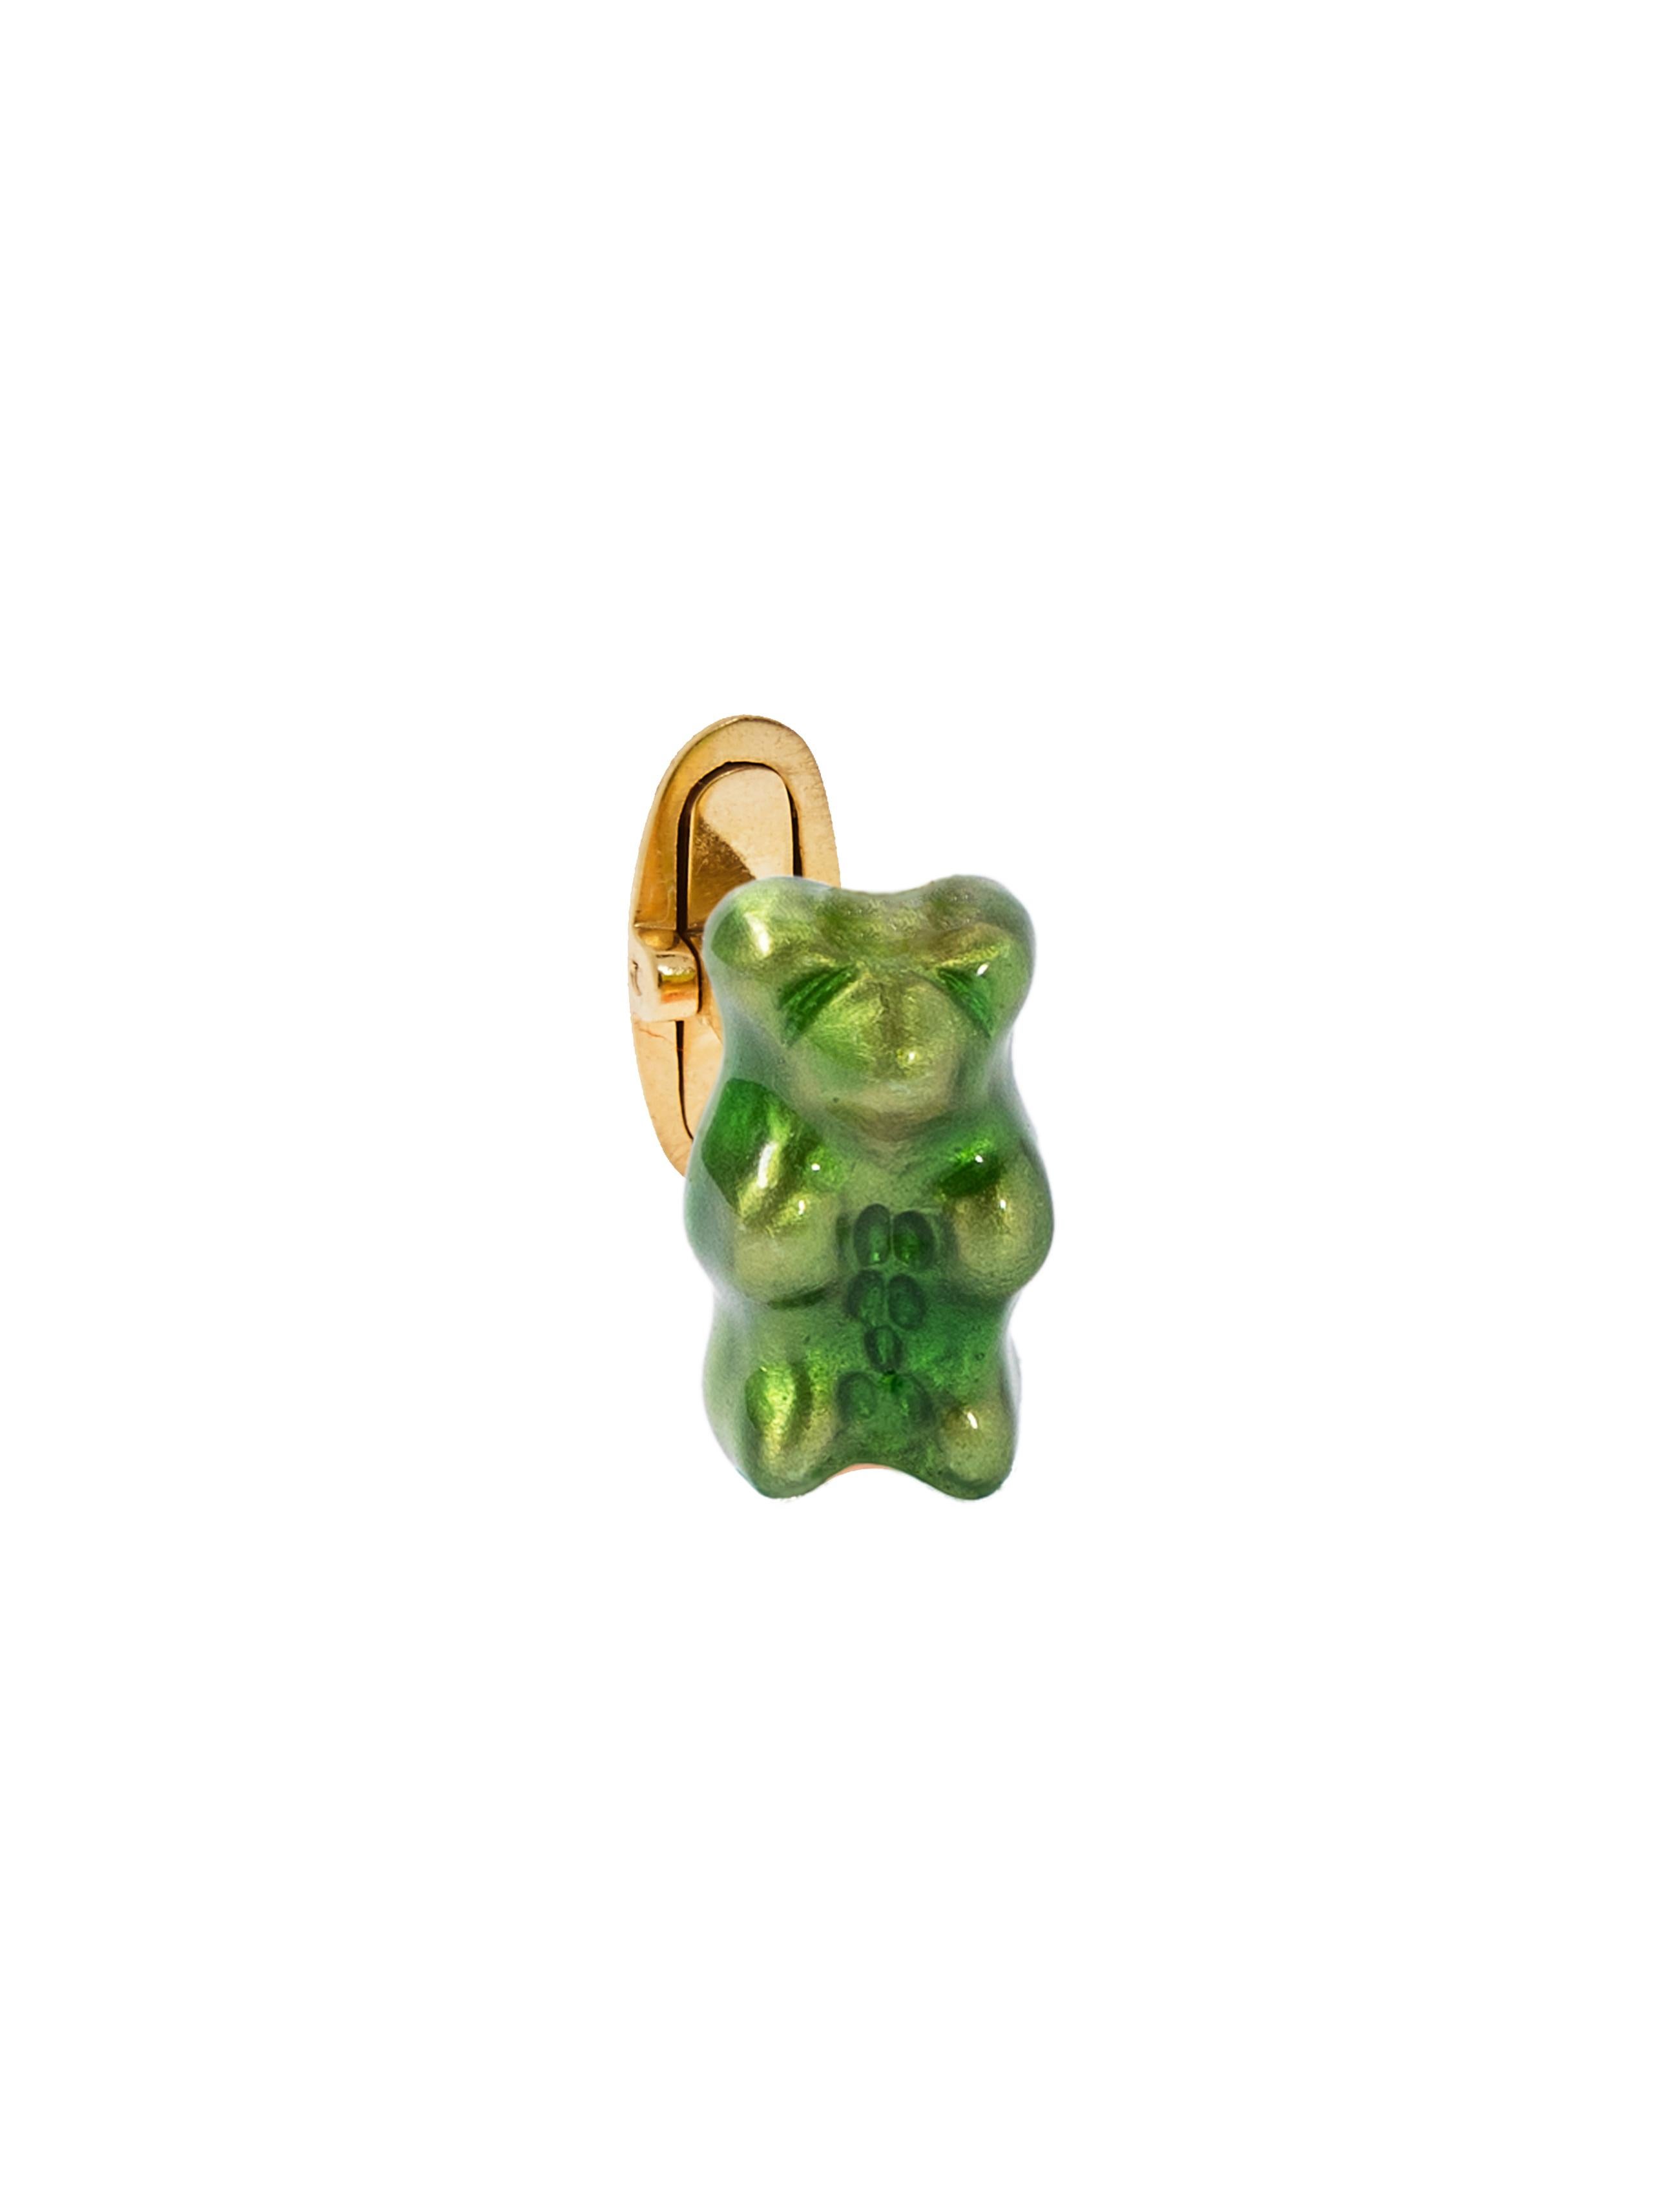 18K gold plated silver gummy bear cufflinks with transparent Green enamel coverage. 

The Gummy Project by Maggoosh is a capsule collection inspired by the designer's life in New York City and her passion for breakdancing and other street arts.